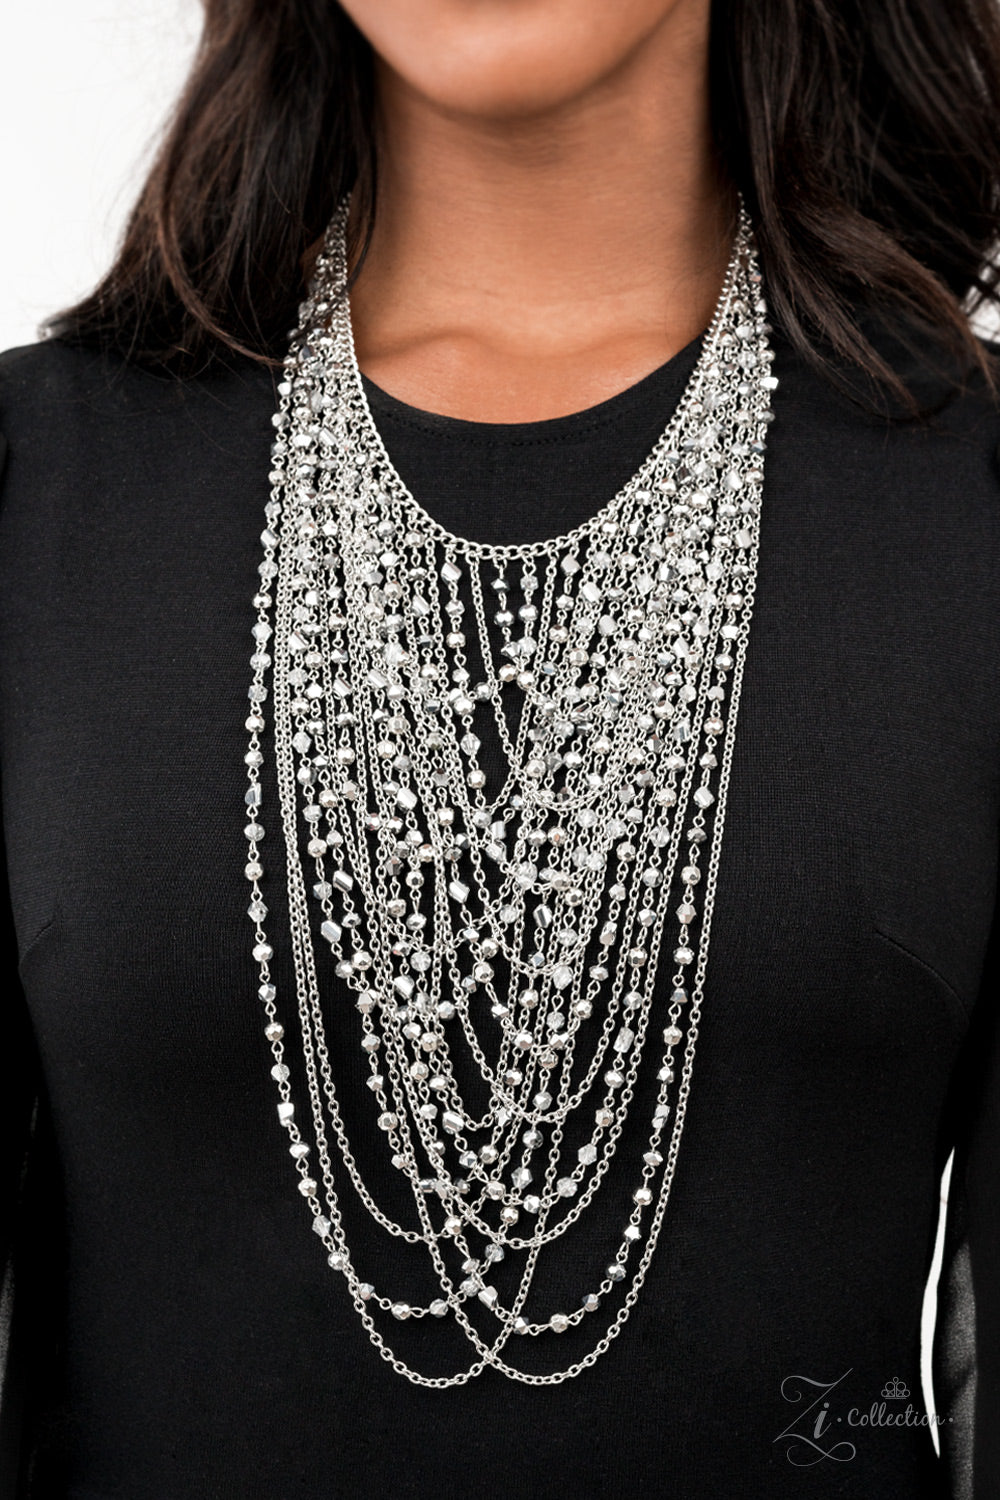 Enticing 2021 Zi Collection Necklace - Paparazzi Accessories  An entrancing collection of raw cut, faceted, and crystal-like silver and hematite beads delicately connect into glitzy strands that dauntlessly drape across the chest. Intermixed with plain silver chains, the swooping layers sway with every movement, creating an audaciously audible shimmer. Features an adjustable clasp closure. Sold as one individual necklace. Includes one pair of matching earrings.